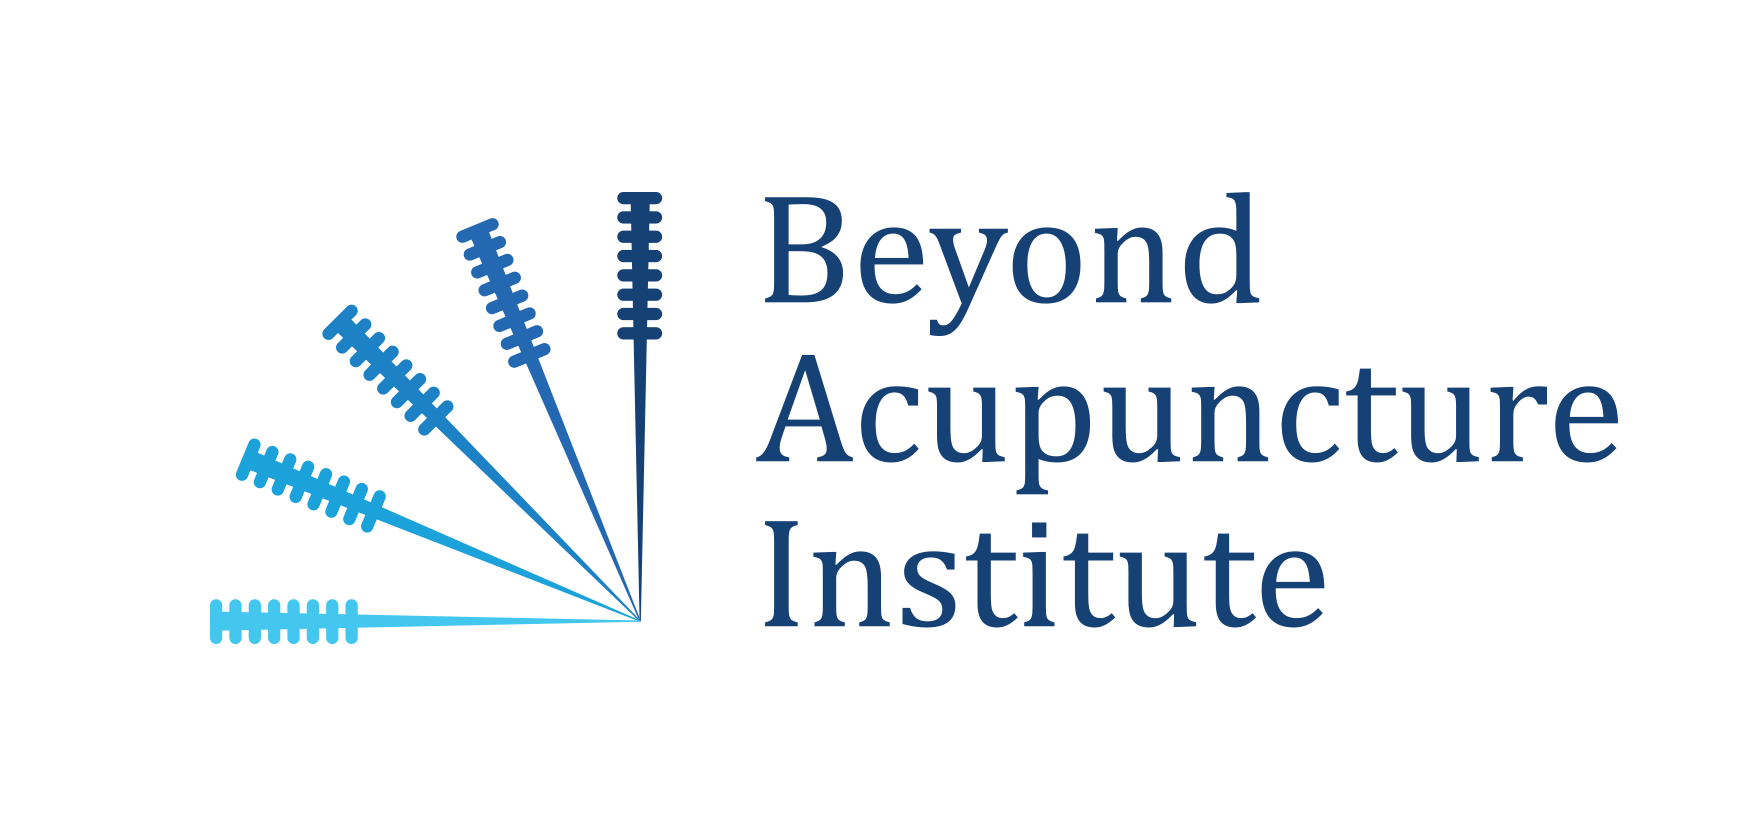 BEYOND ACUPUNCTURE